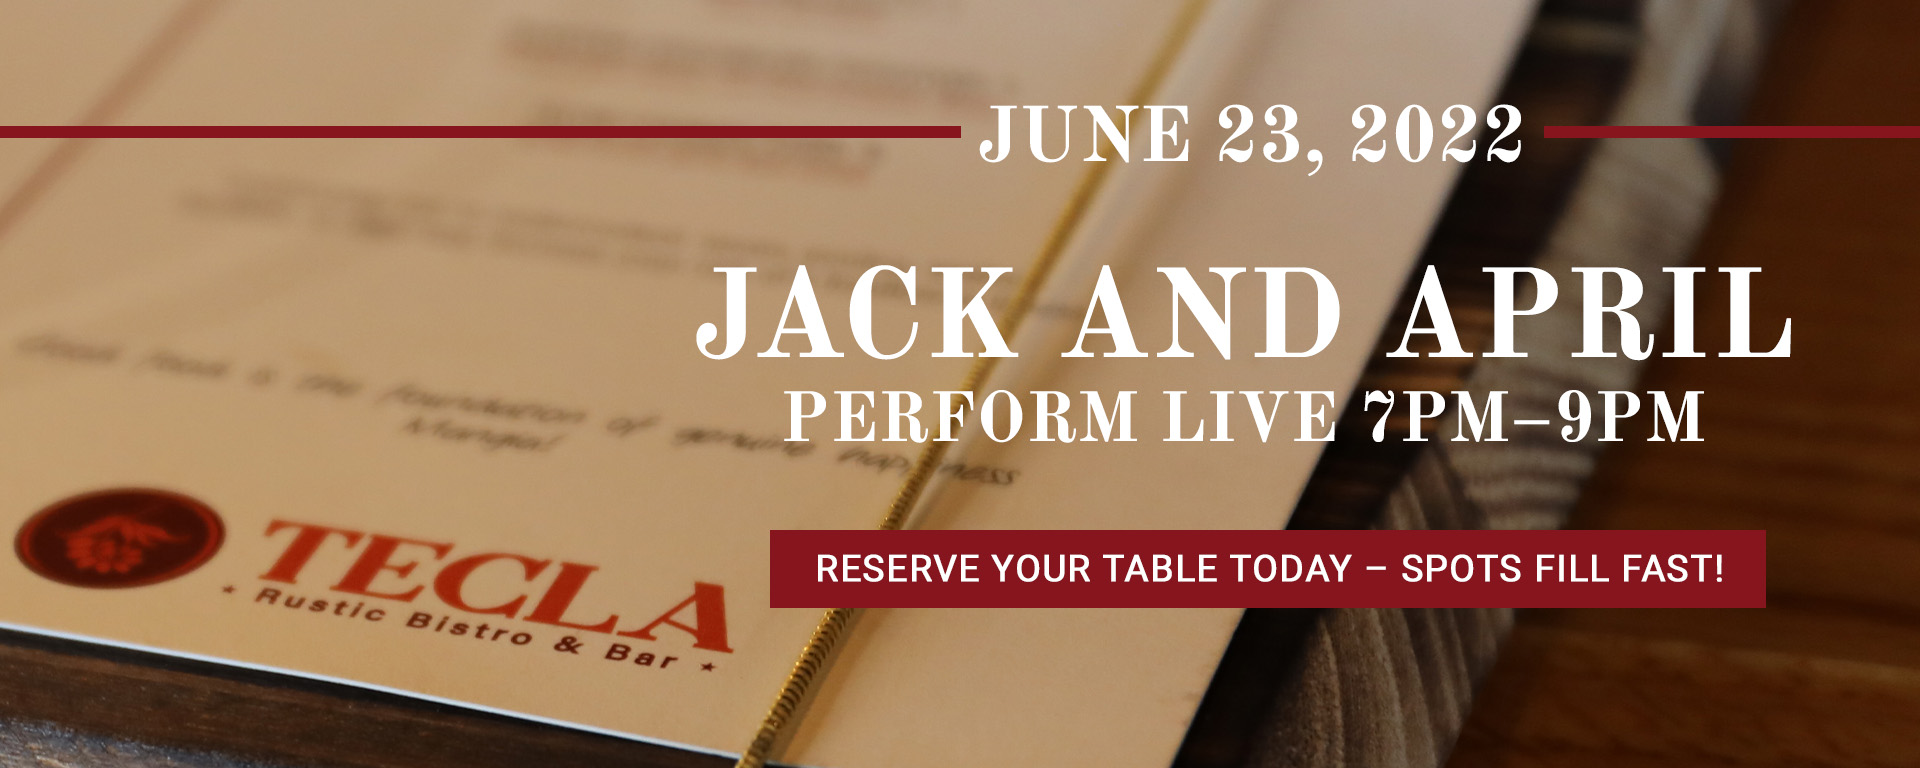 06/23/22 LIVE MUSIC FEATURING JACK AND APRIL